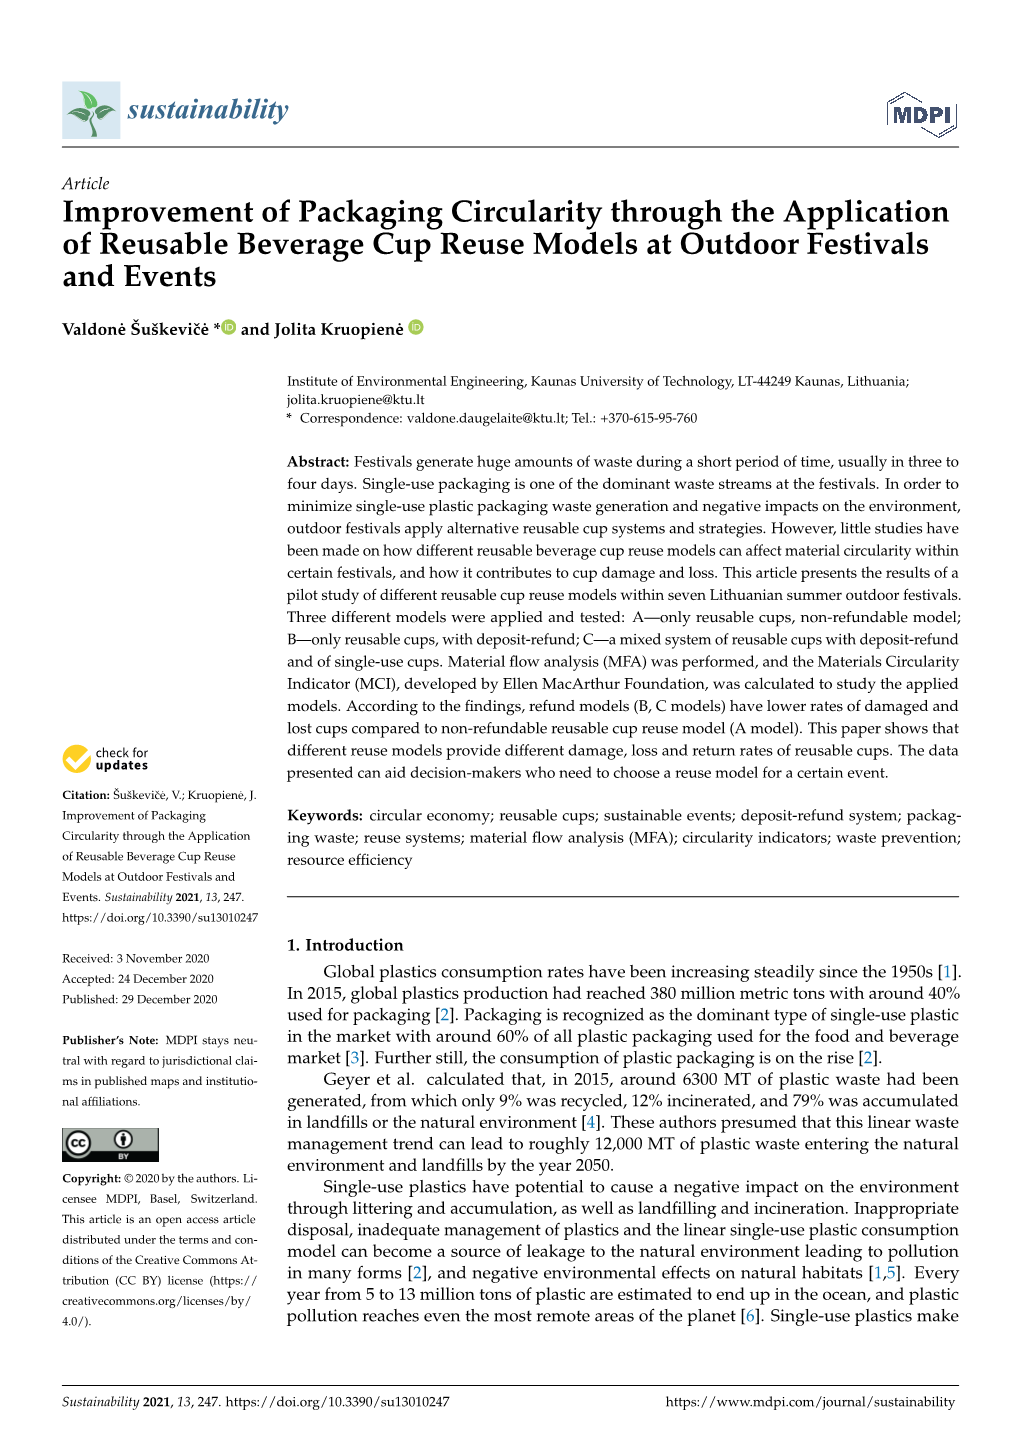 Improvement of Packaging Circularity Through the Application of Reusable Beverage Cup Reuse Models at Outdoor Festivals and Events